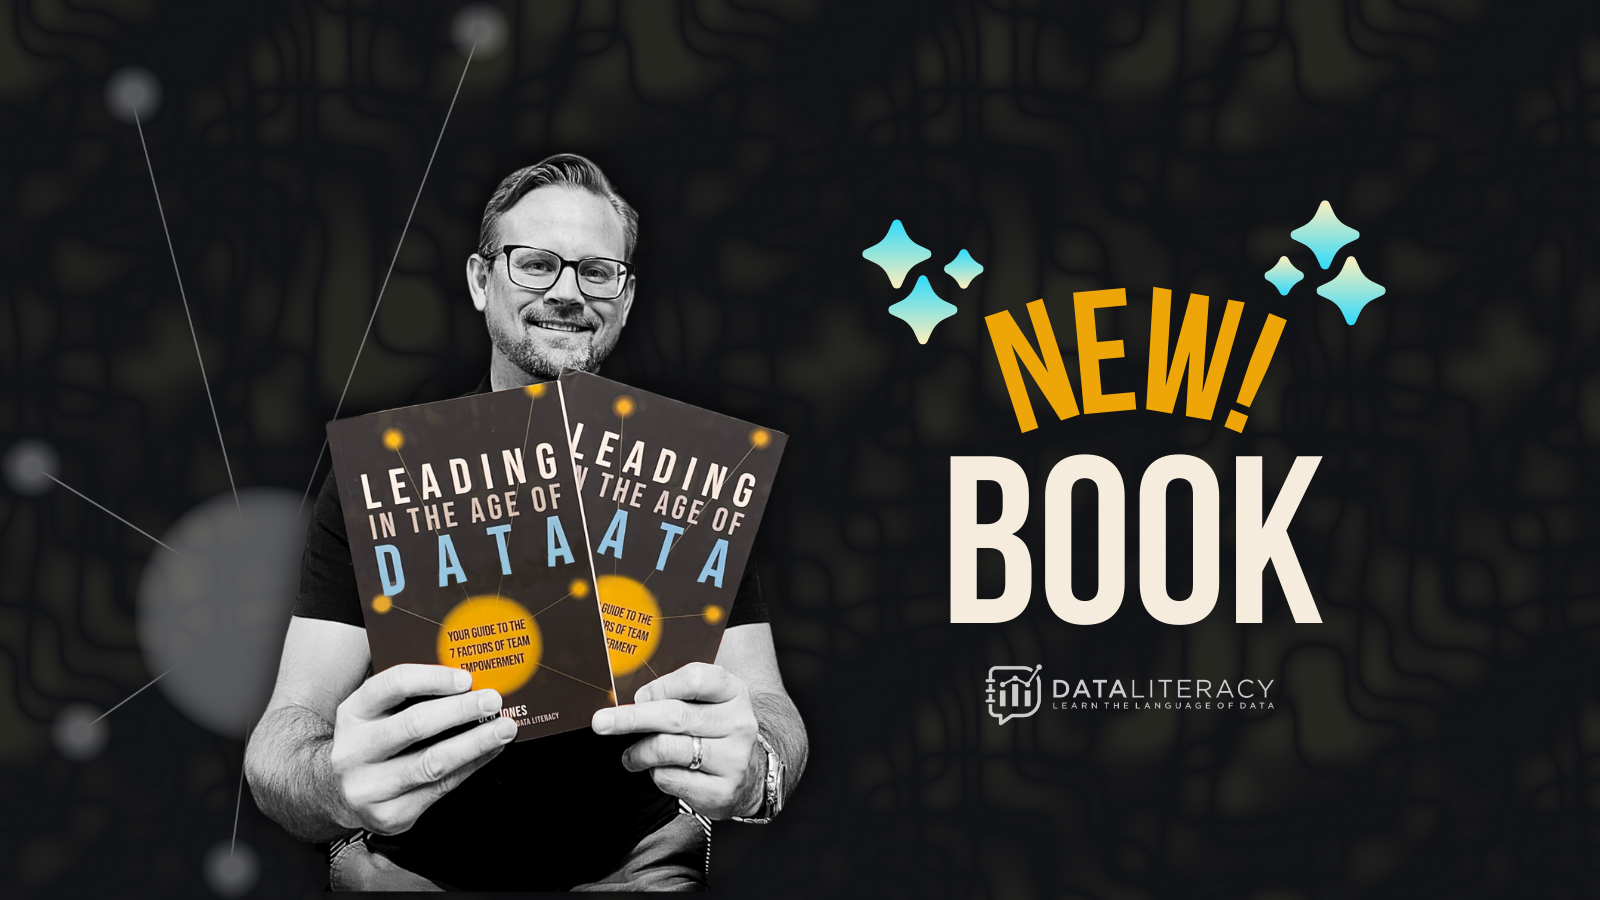 New Release: “Leading in the Age of Data” by Ben Jones | Data Literacy | Data Literacy  